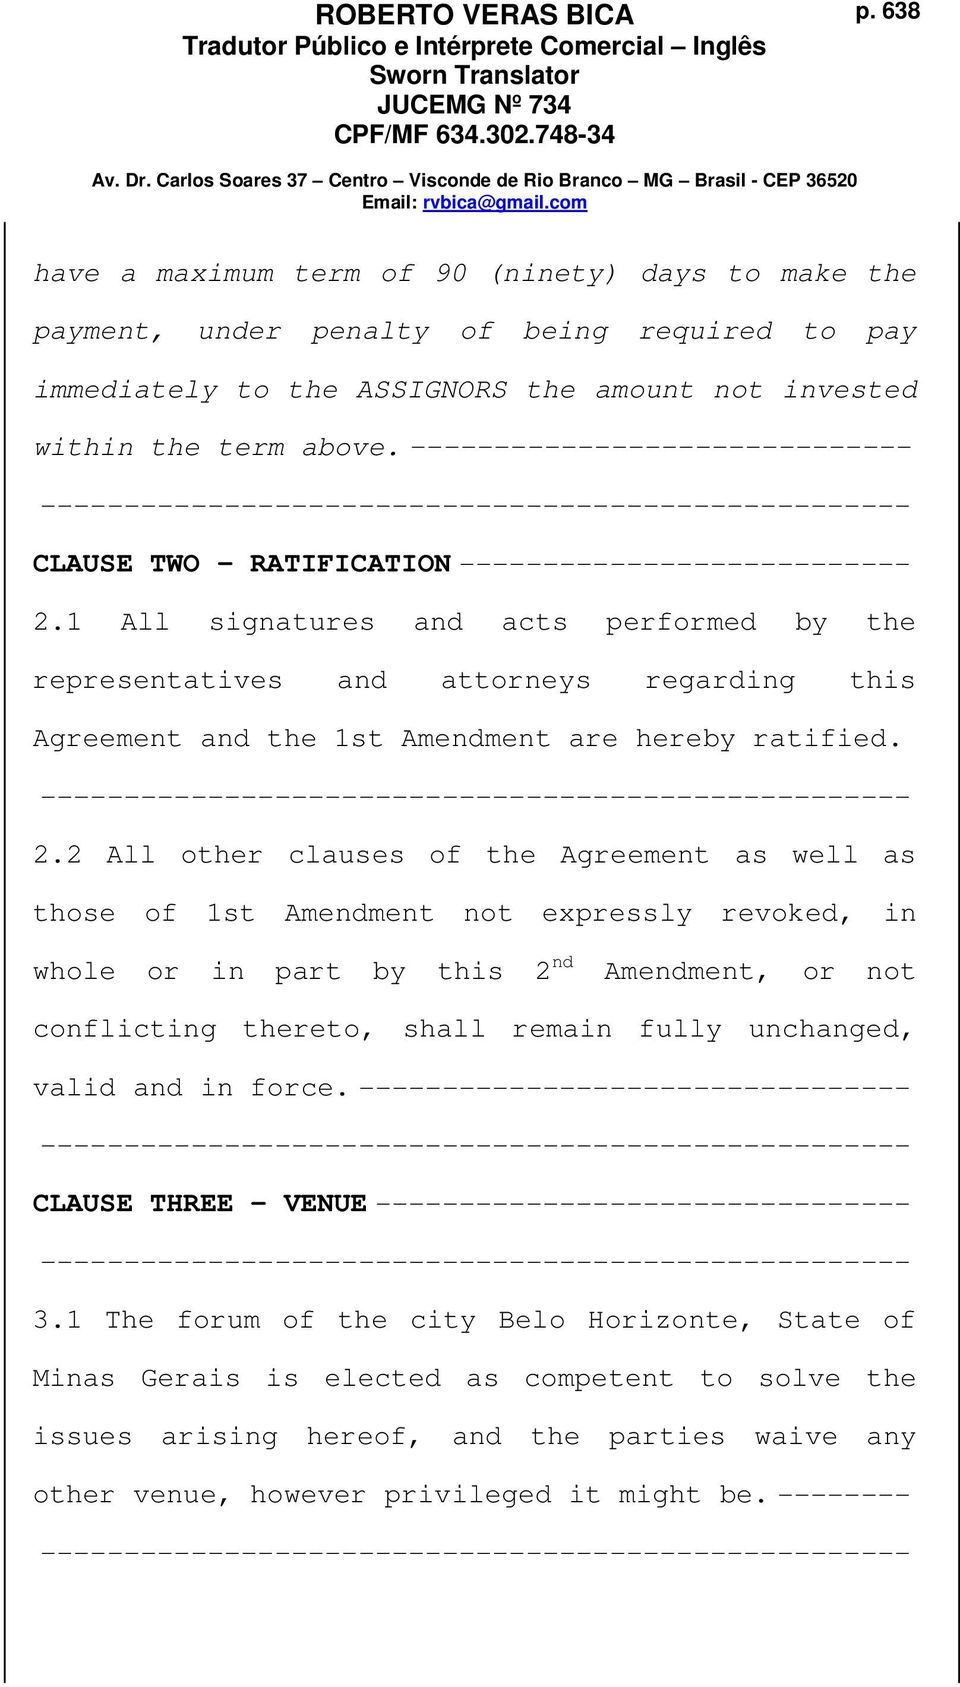 1 All signatures and acts performed by the representatives and attorneys regarding this Agreement and the 1st Amendment are hereby ratified. 2.